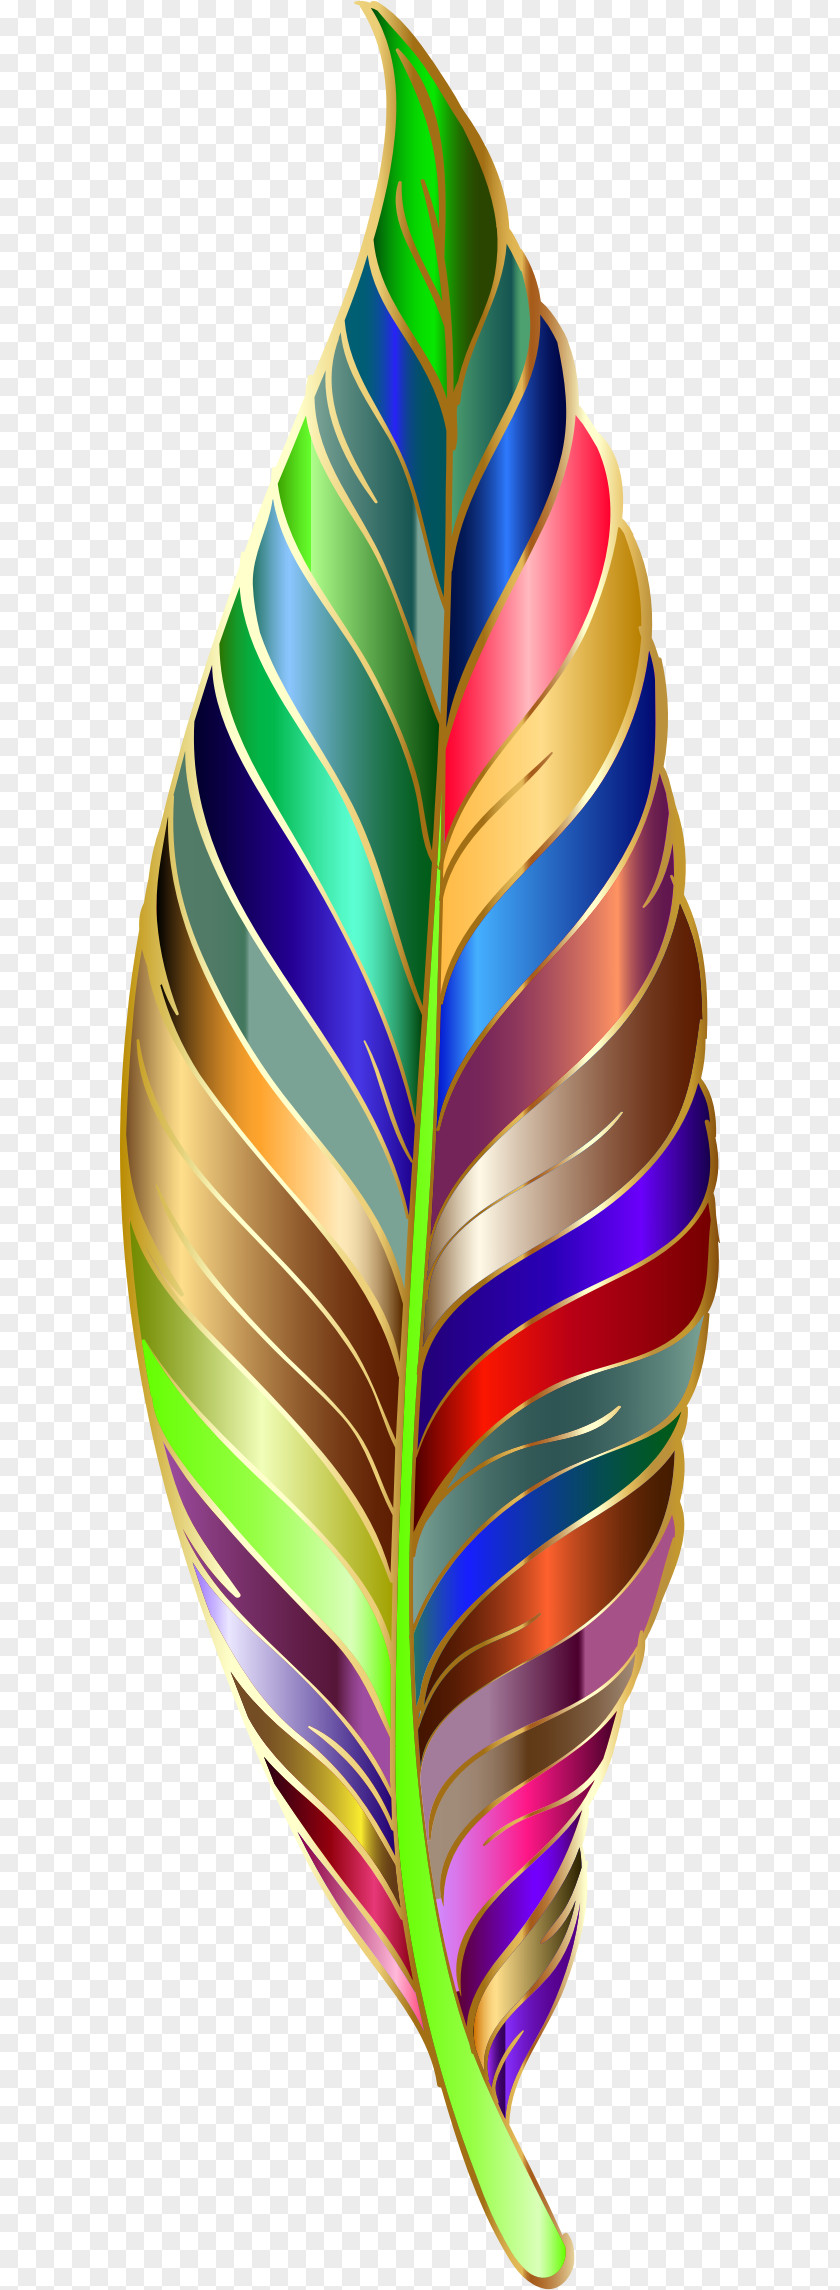 Feathers Clip Art PNG